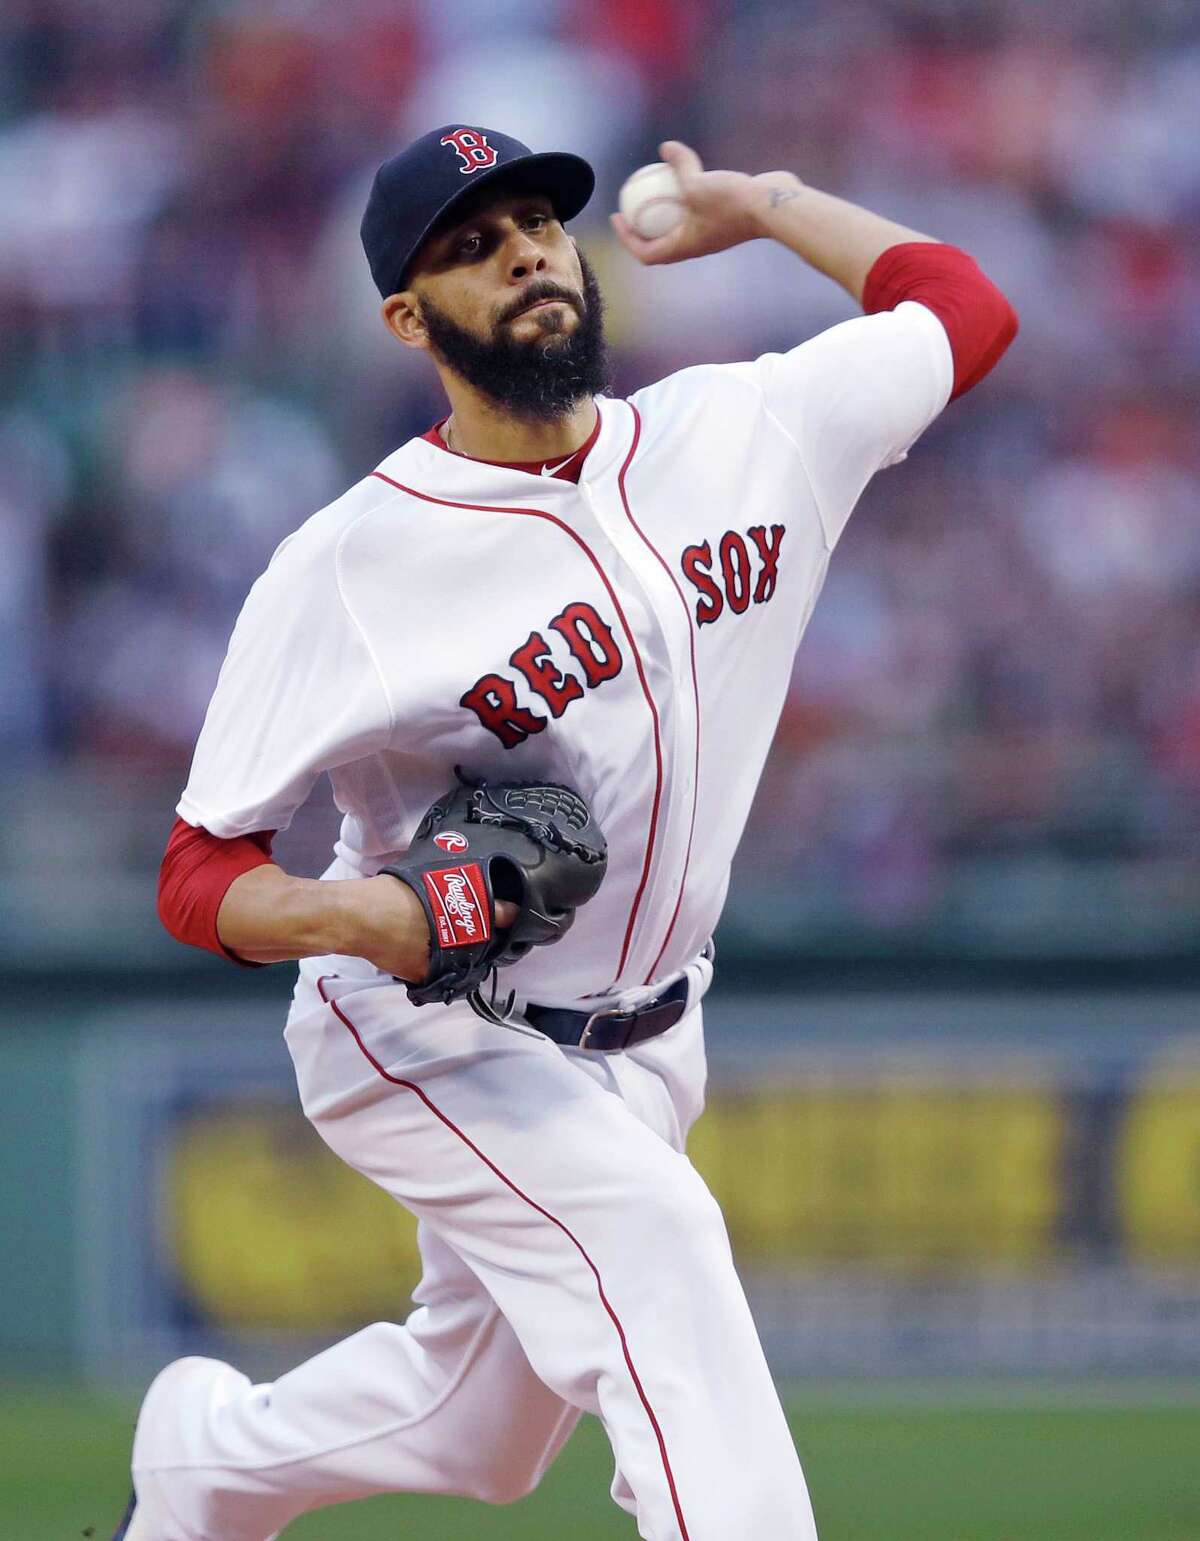 Boston Red Sox starting pitcher David Price delivers during the first inning of a baseball game against the Philadelphia Phillies at Fenway Park in Boston, Monday, July 30, 2018. (AP Photo/Charles Krupa)